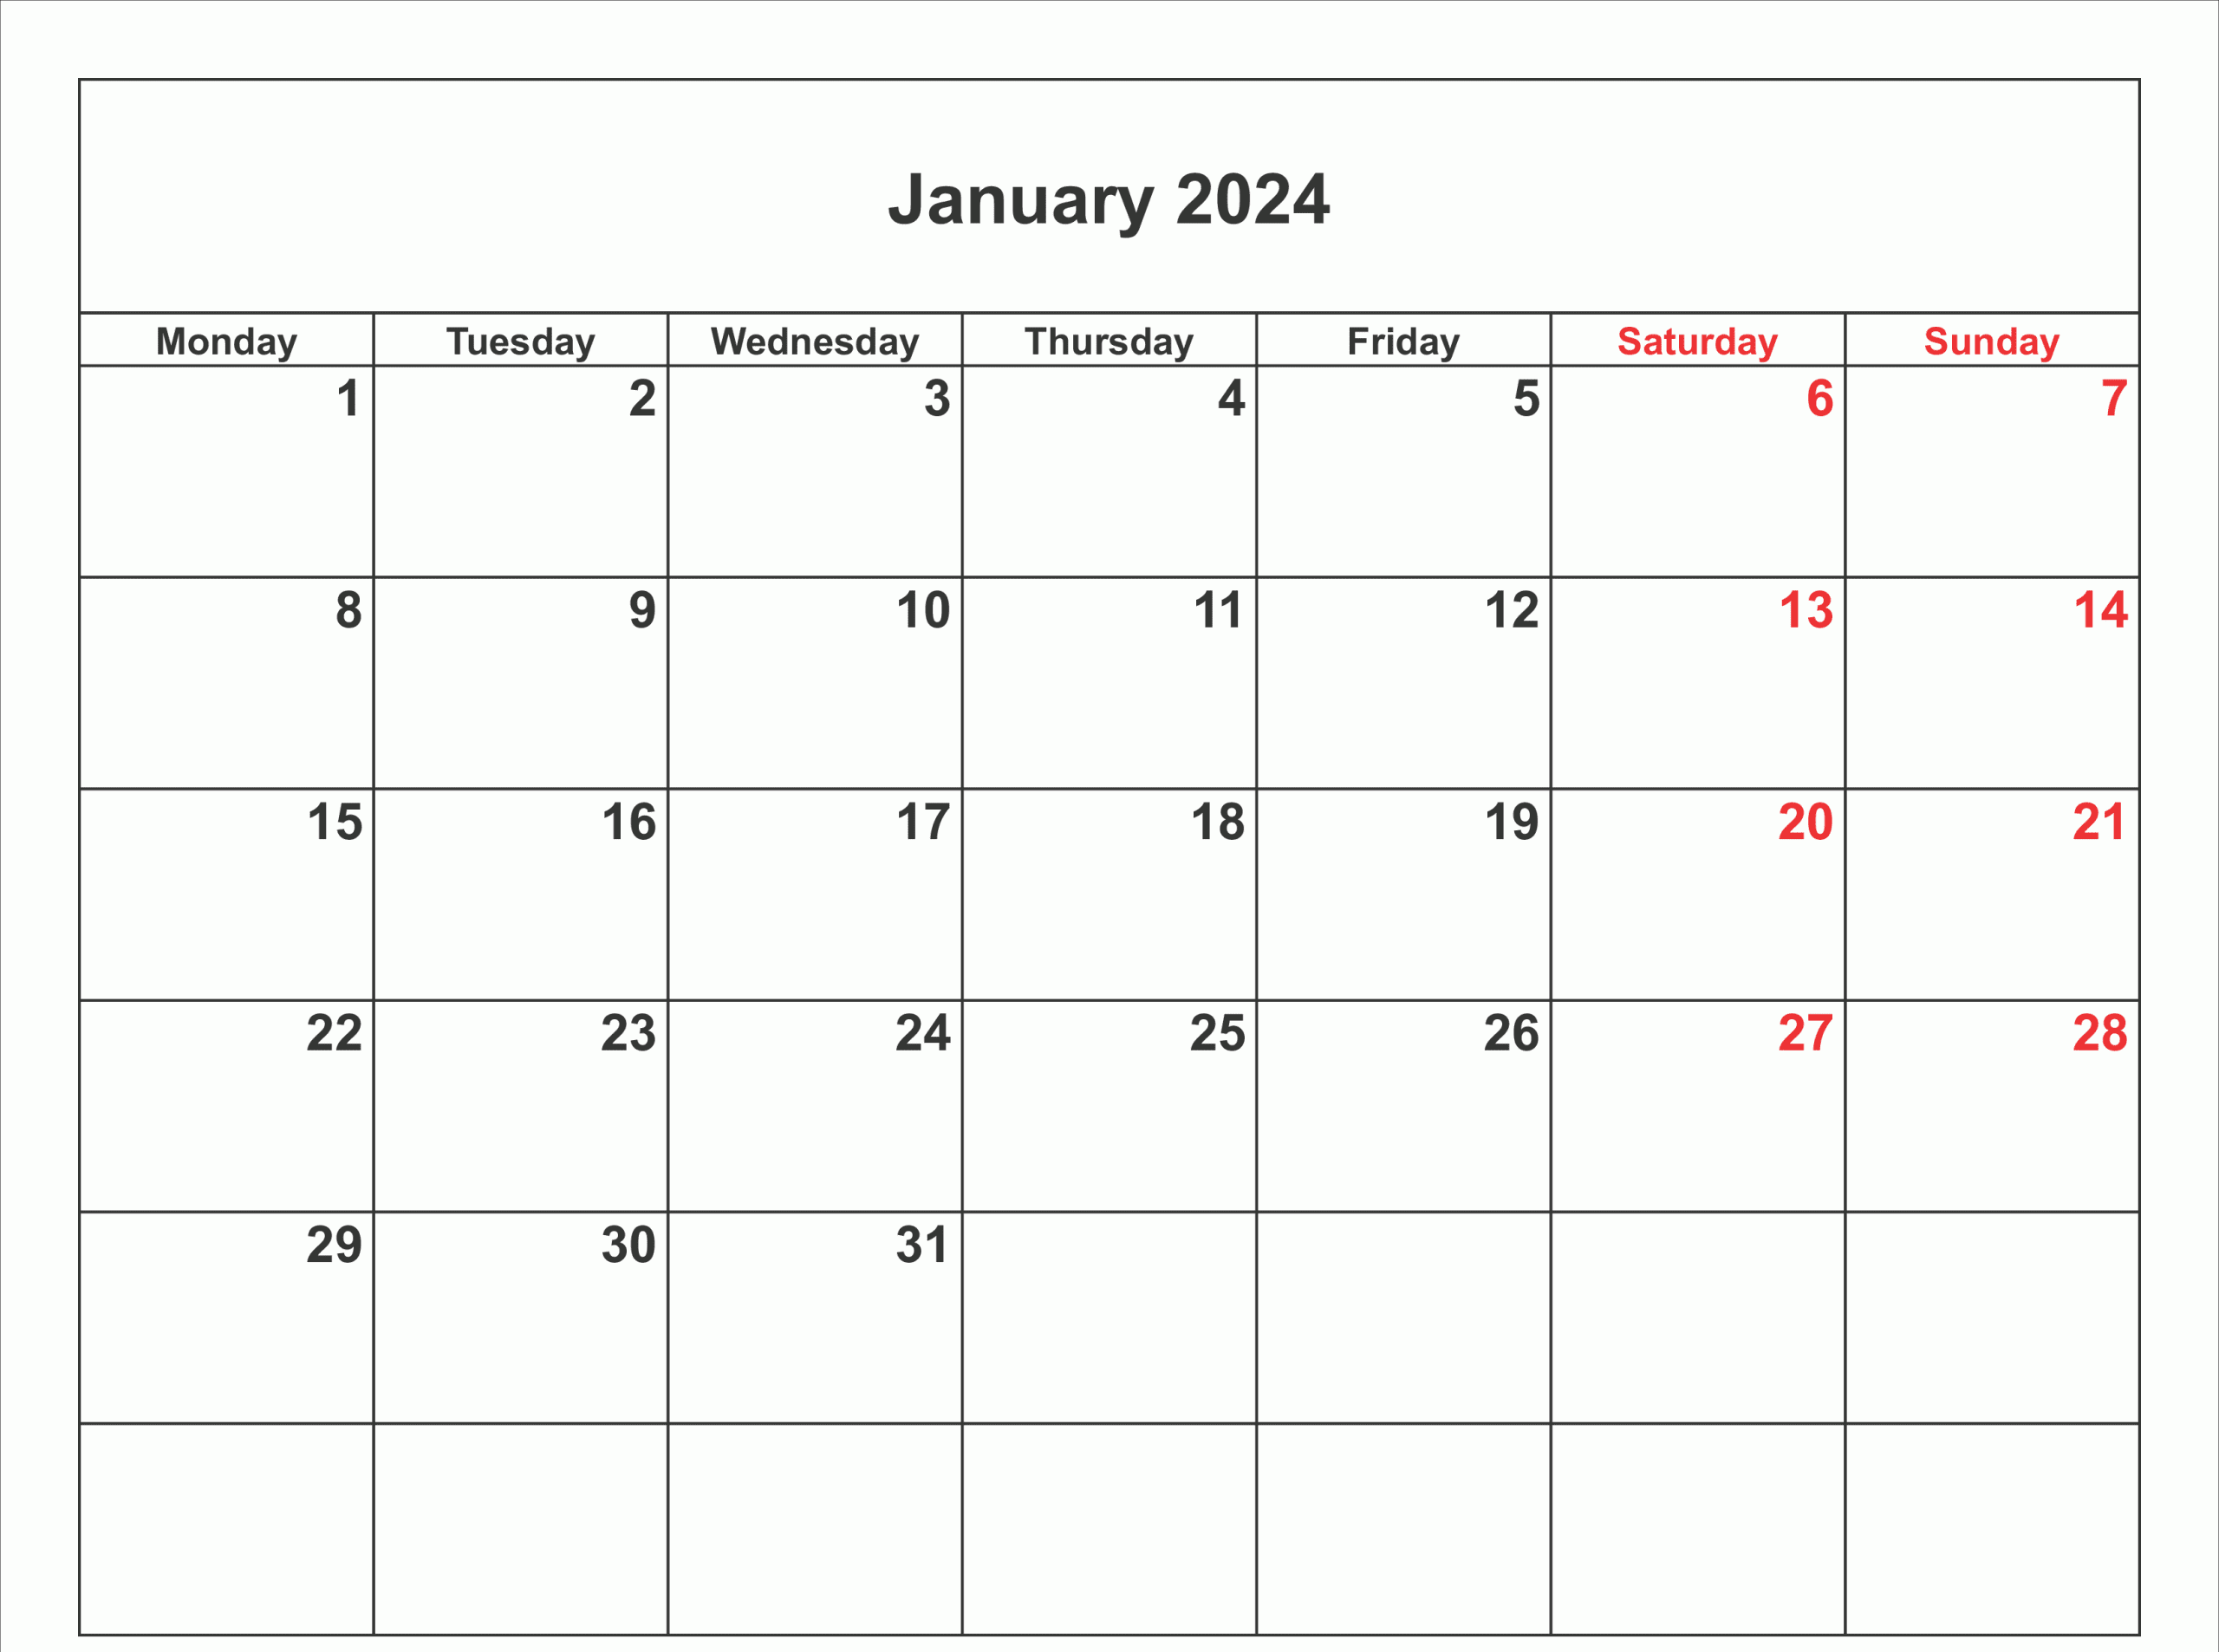 January 2024 calendar template with holidays and events